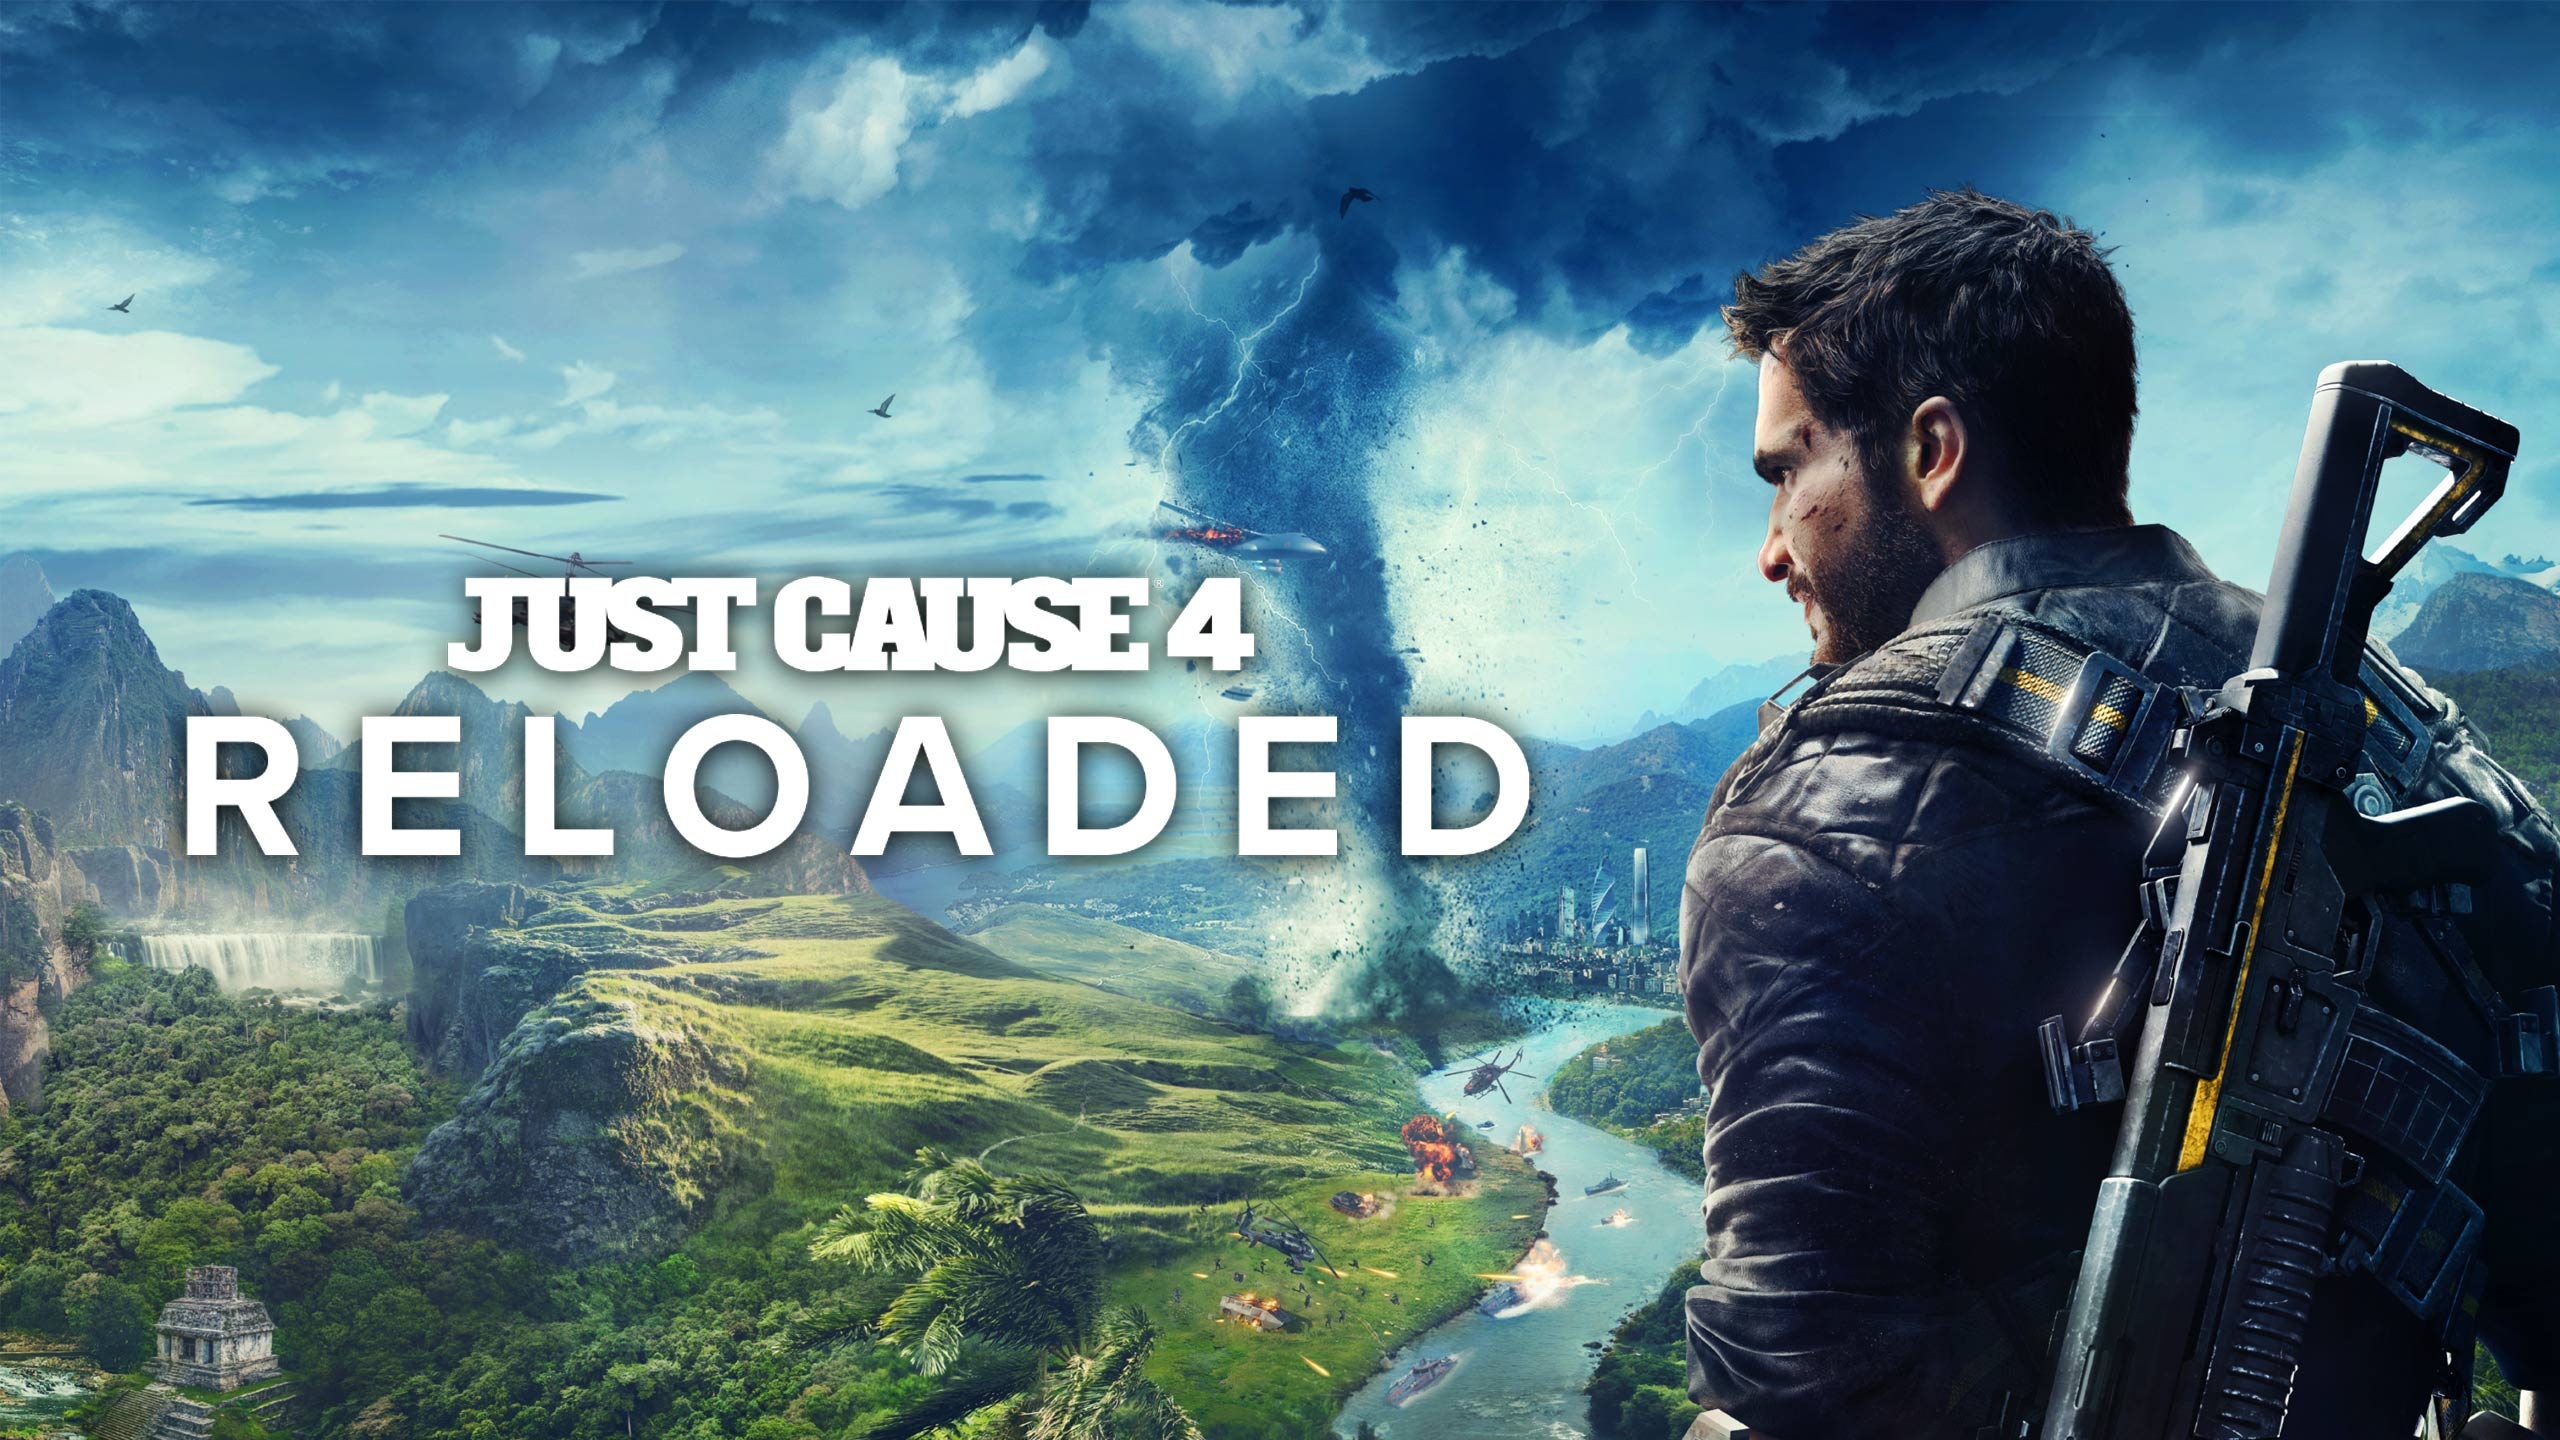 just cause 4 playstation plus